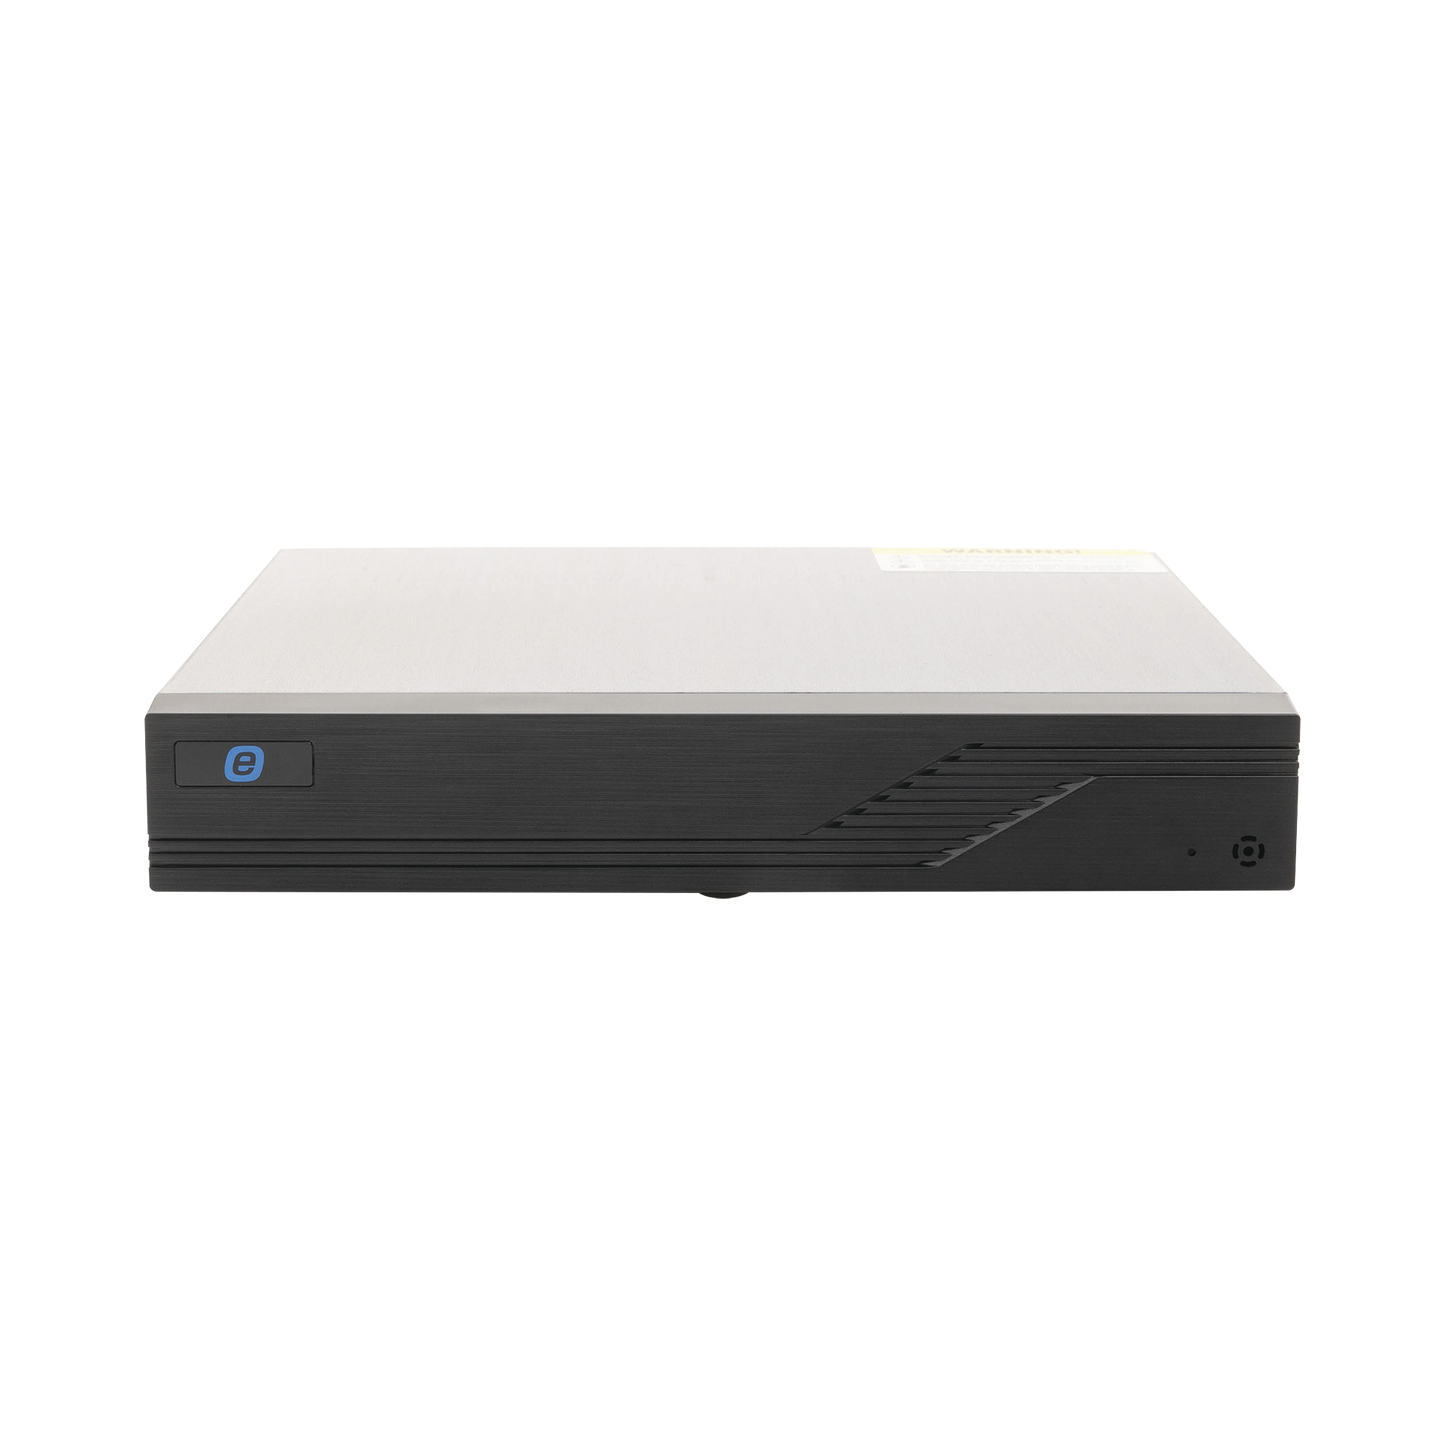 DVR 1080p / 8 Channels TURBOHD + 2 Channels IP / Support 1 Hard Disk / Video Output FULL HD / H.265 / AHD, TVI, CVBS, CVI / 1 Channel Audio / Cloud Video Recording